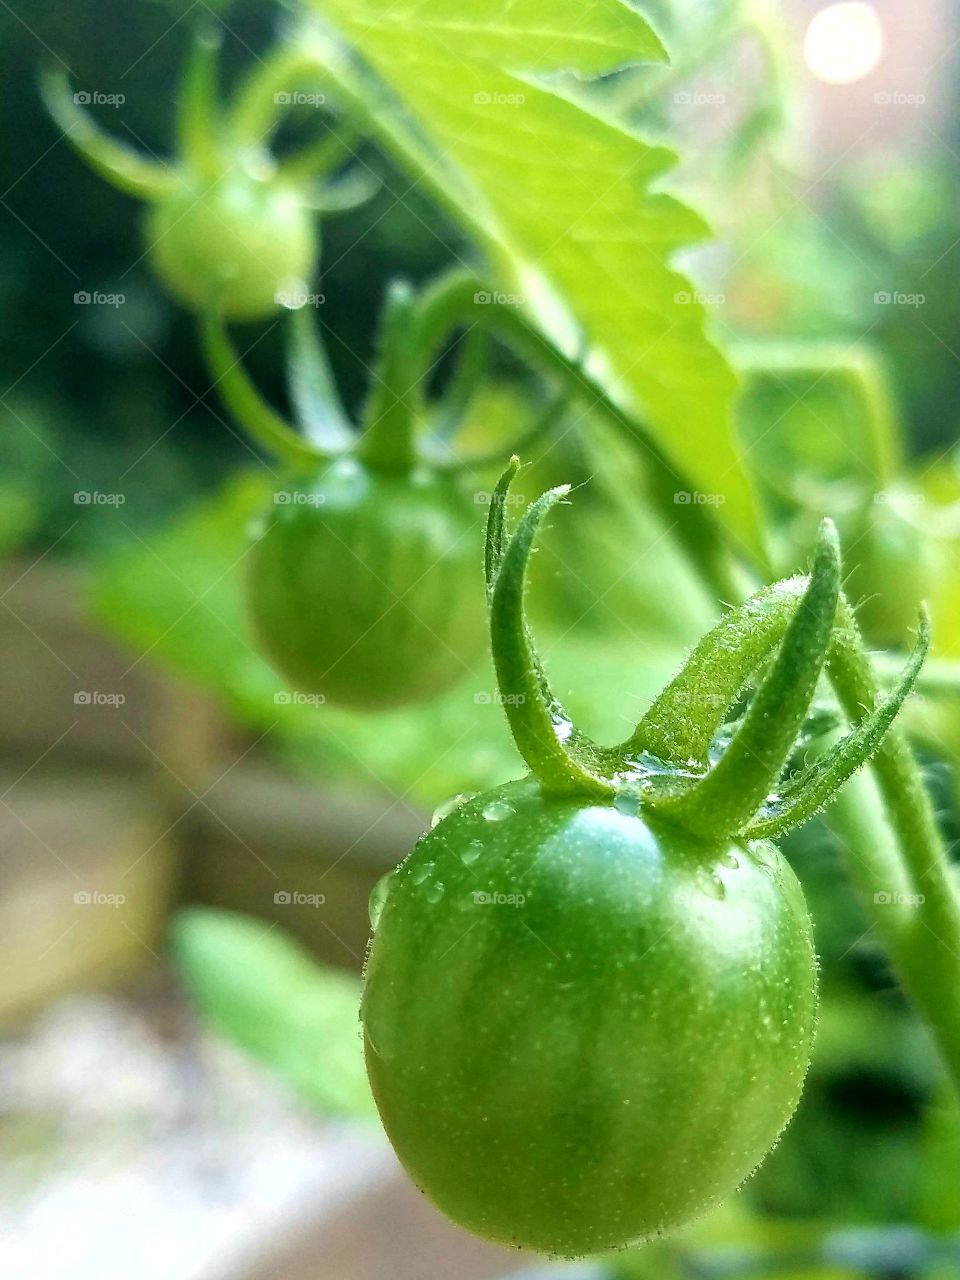 three green tomatoes on the vine, in a line, after rainstorm